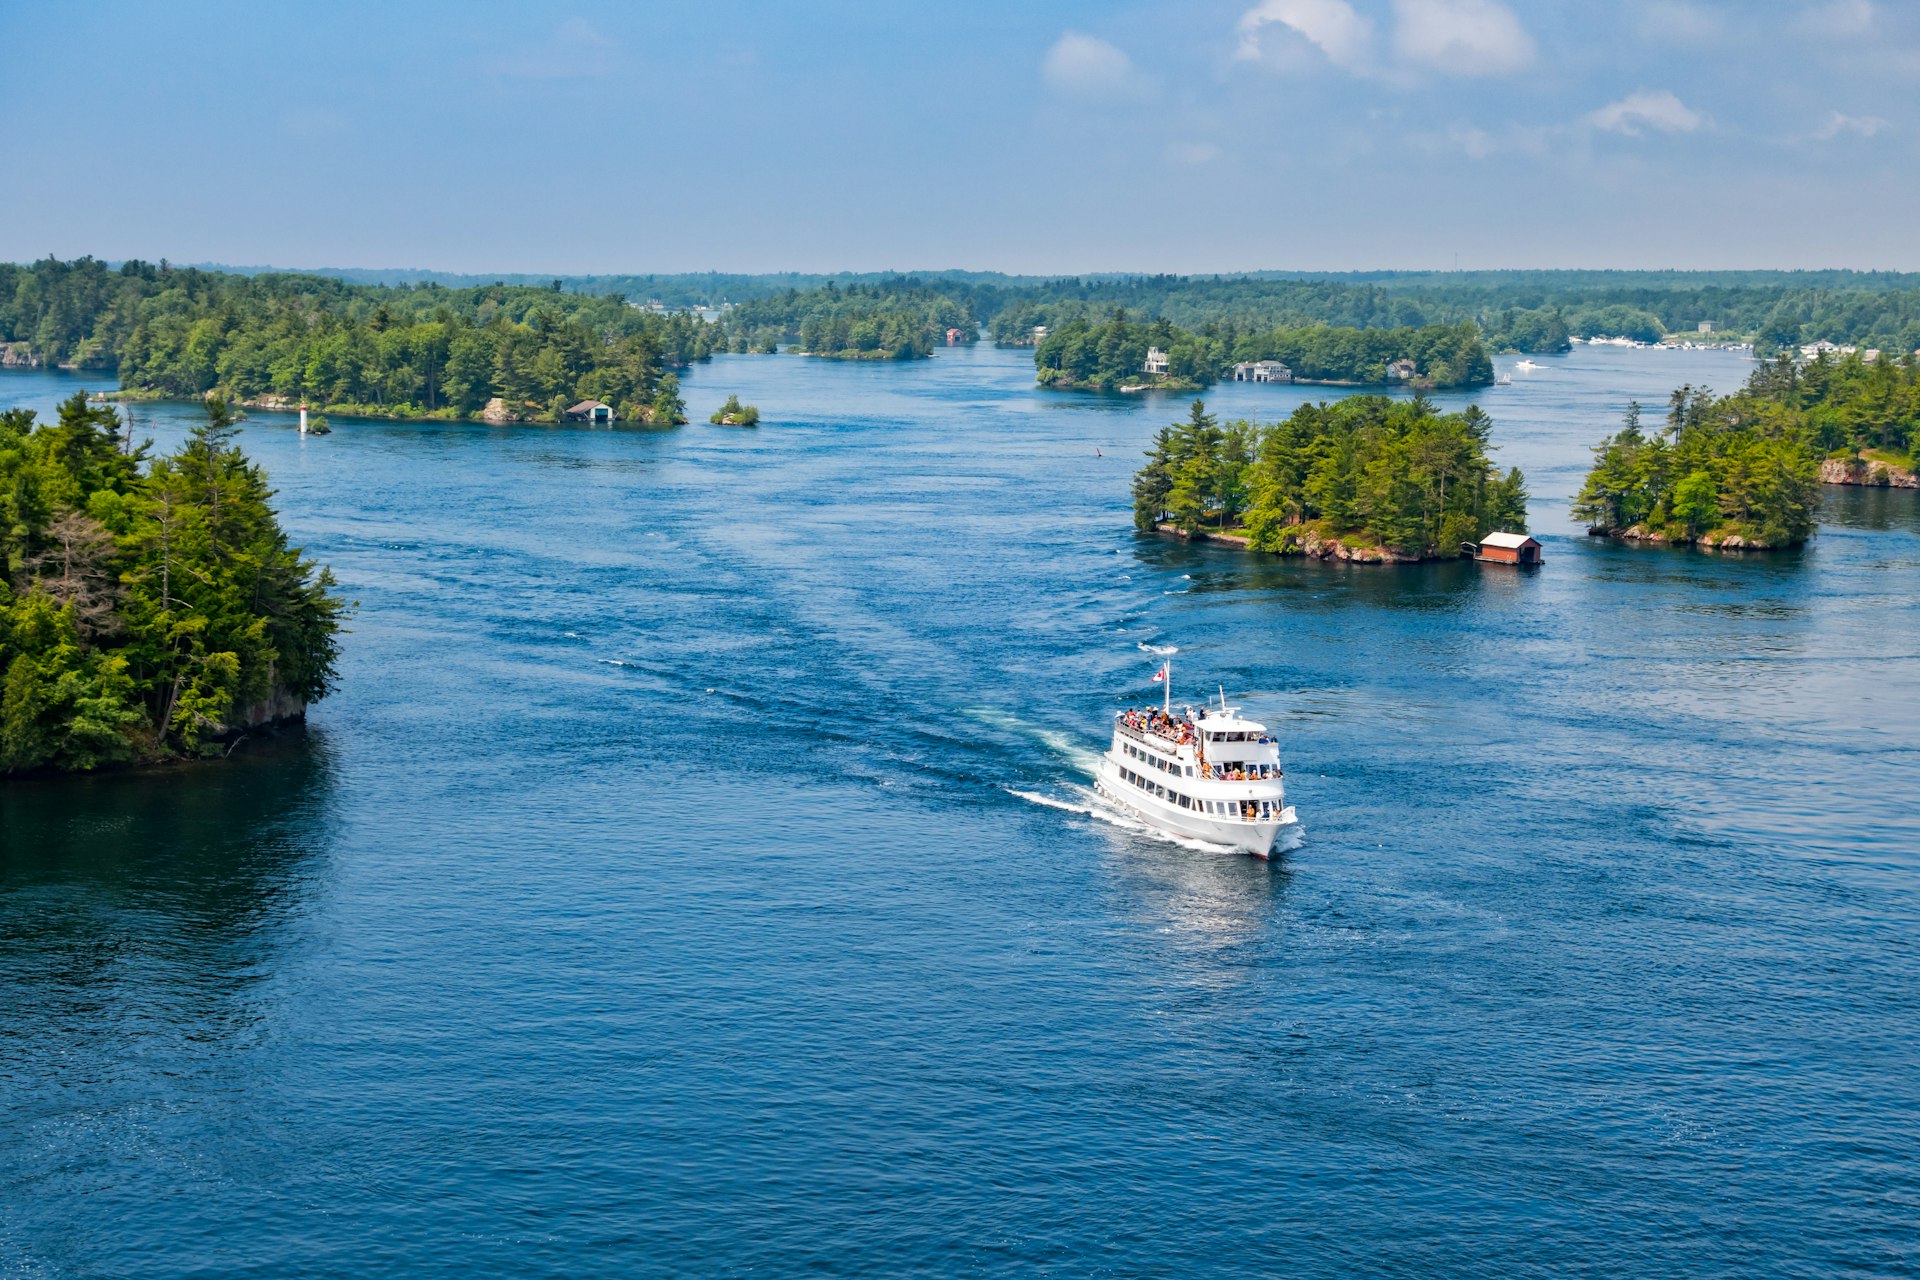 An aerial shot of a tour boat cutting through a vast body of water littered with greenery-covered islands